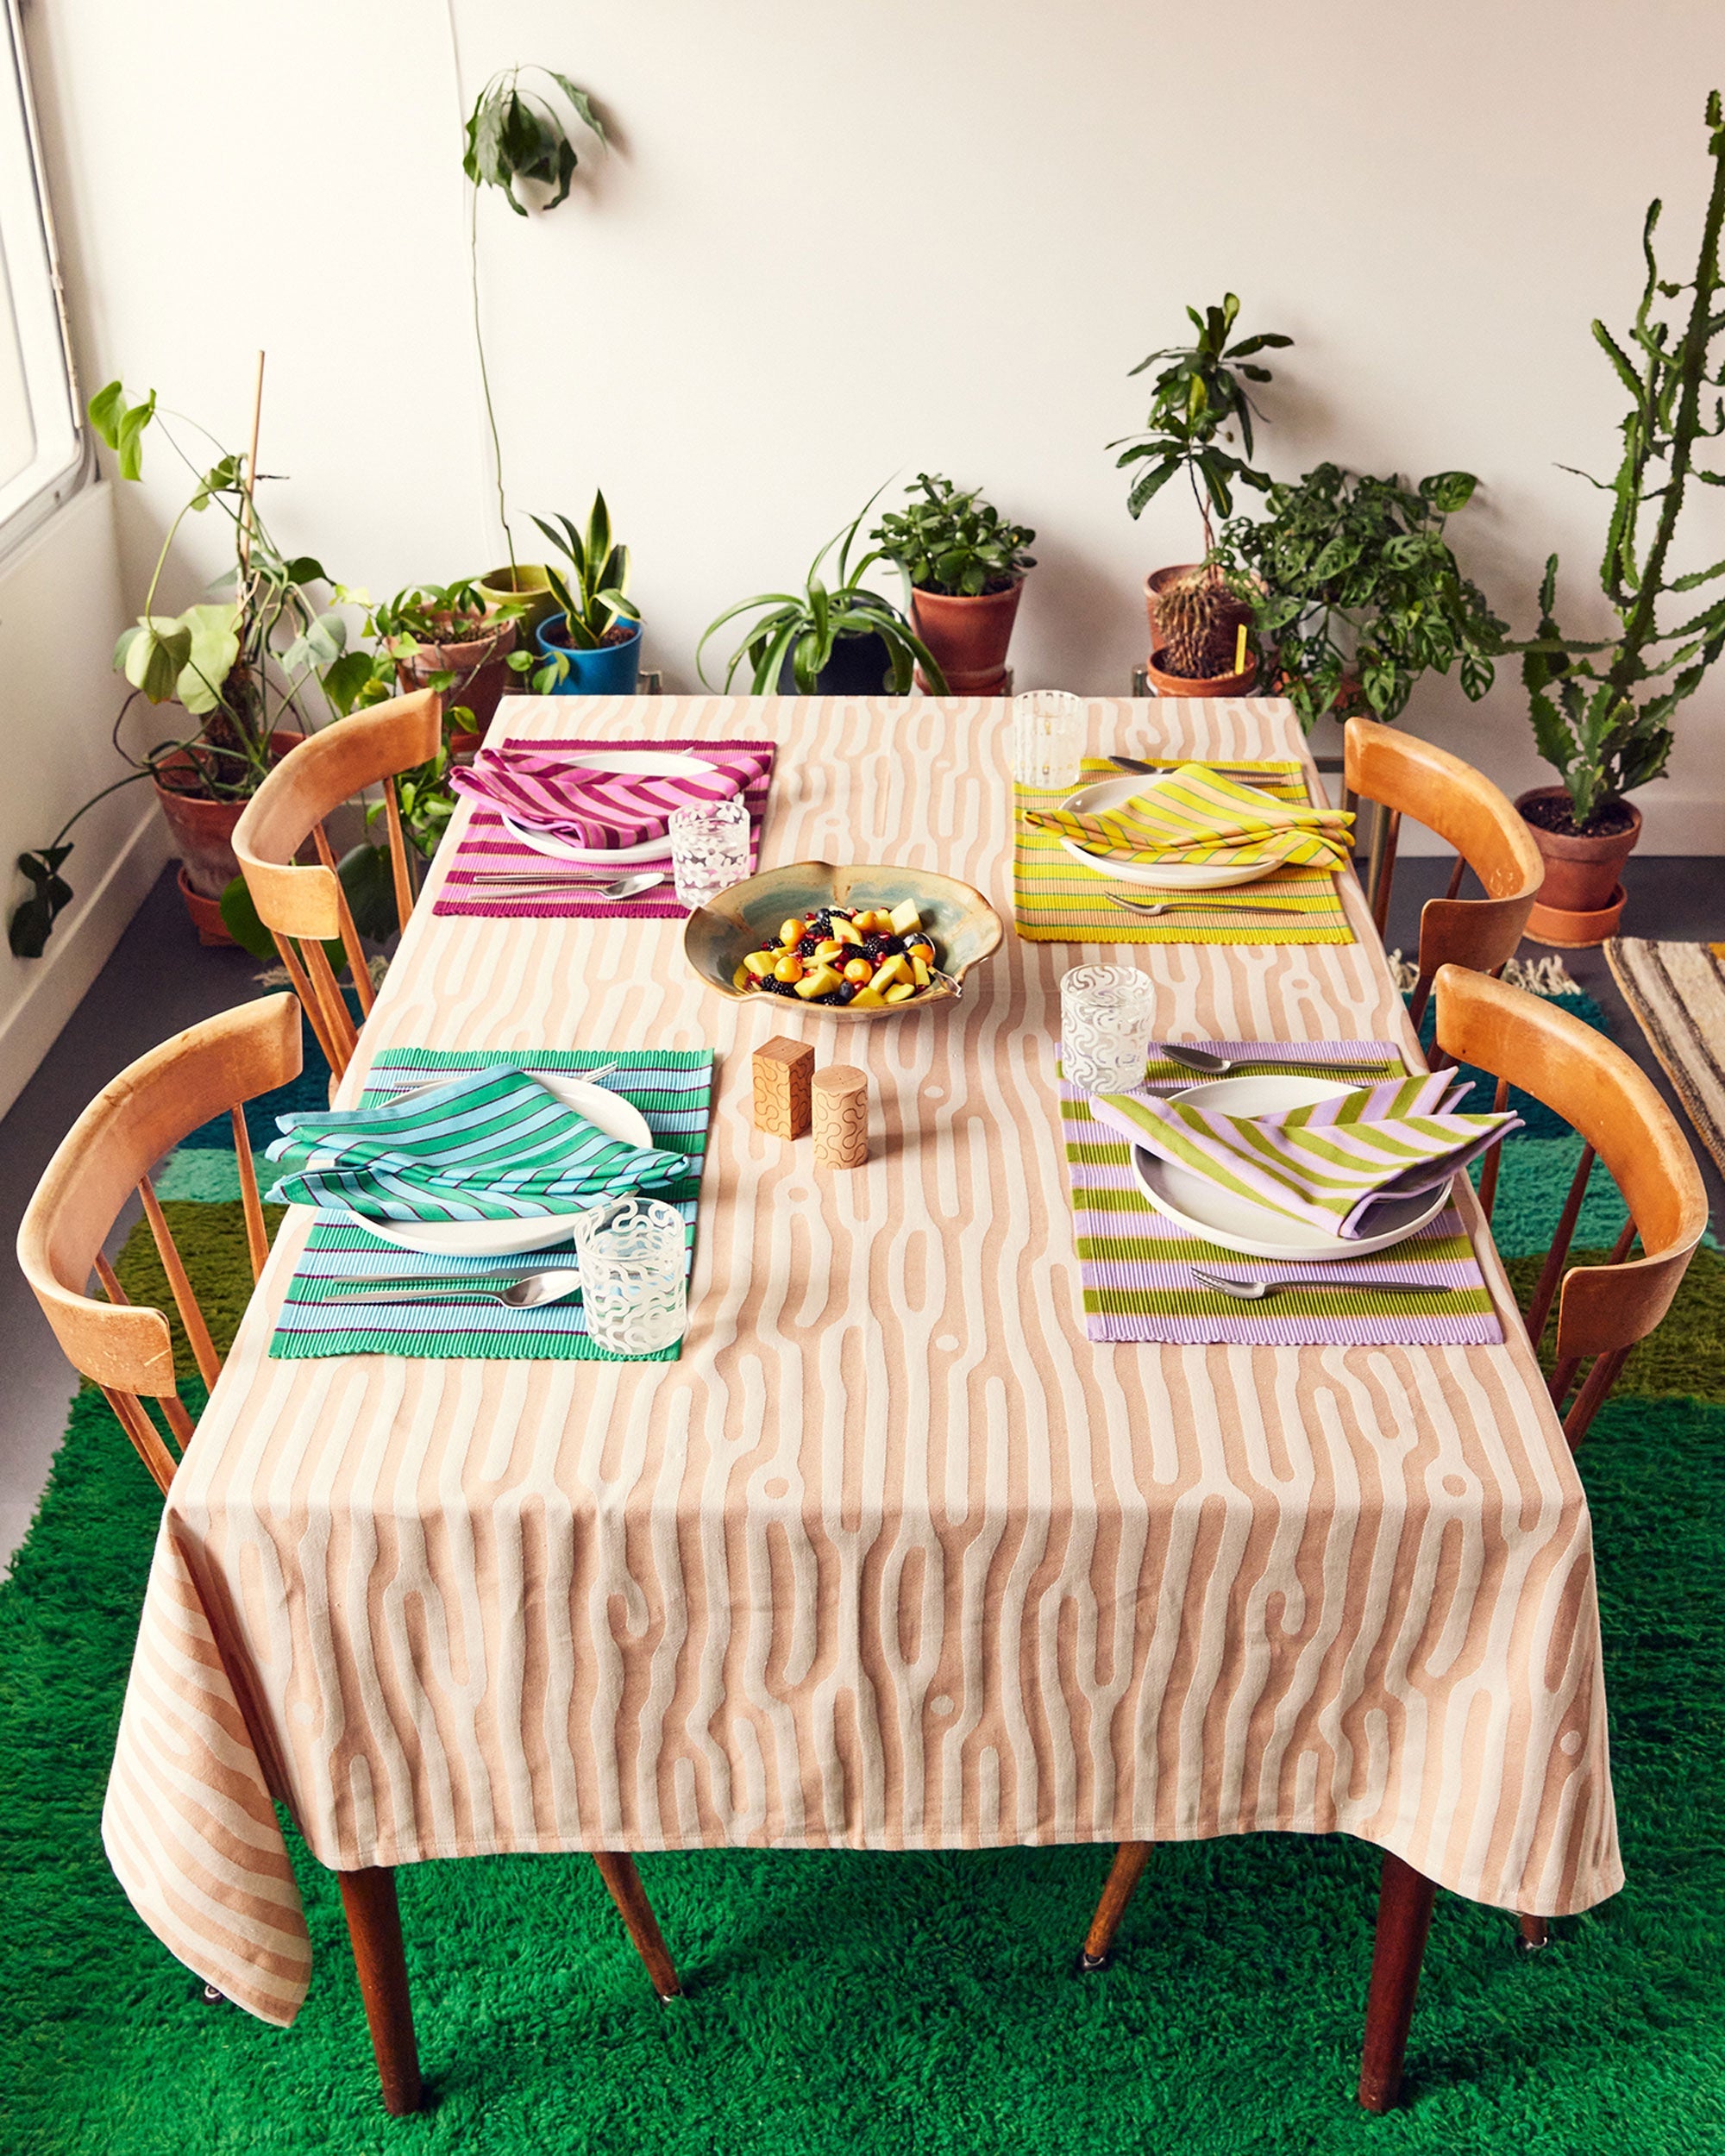 Dusen Dusen pink, yellow, blue, purple stripe placemats and napkins on tree pattern tablecloth